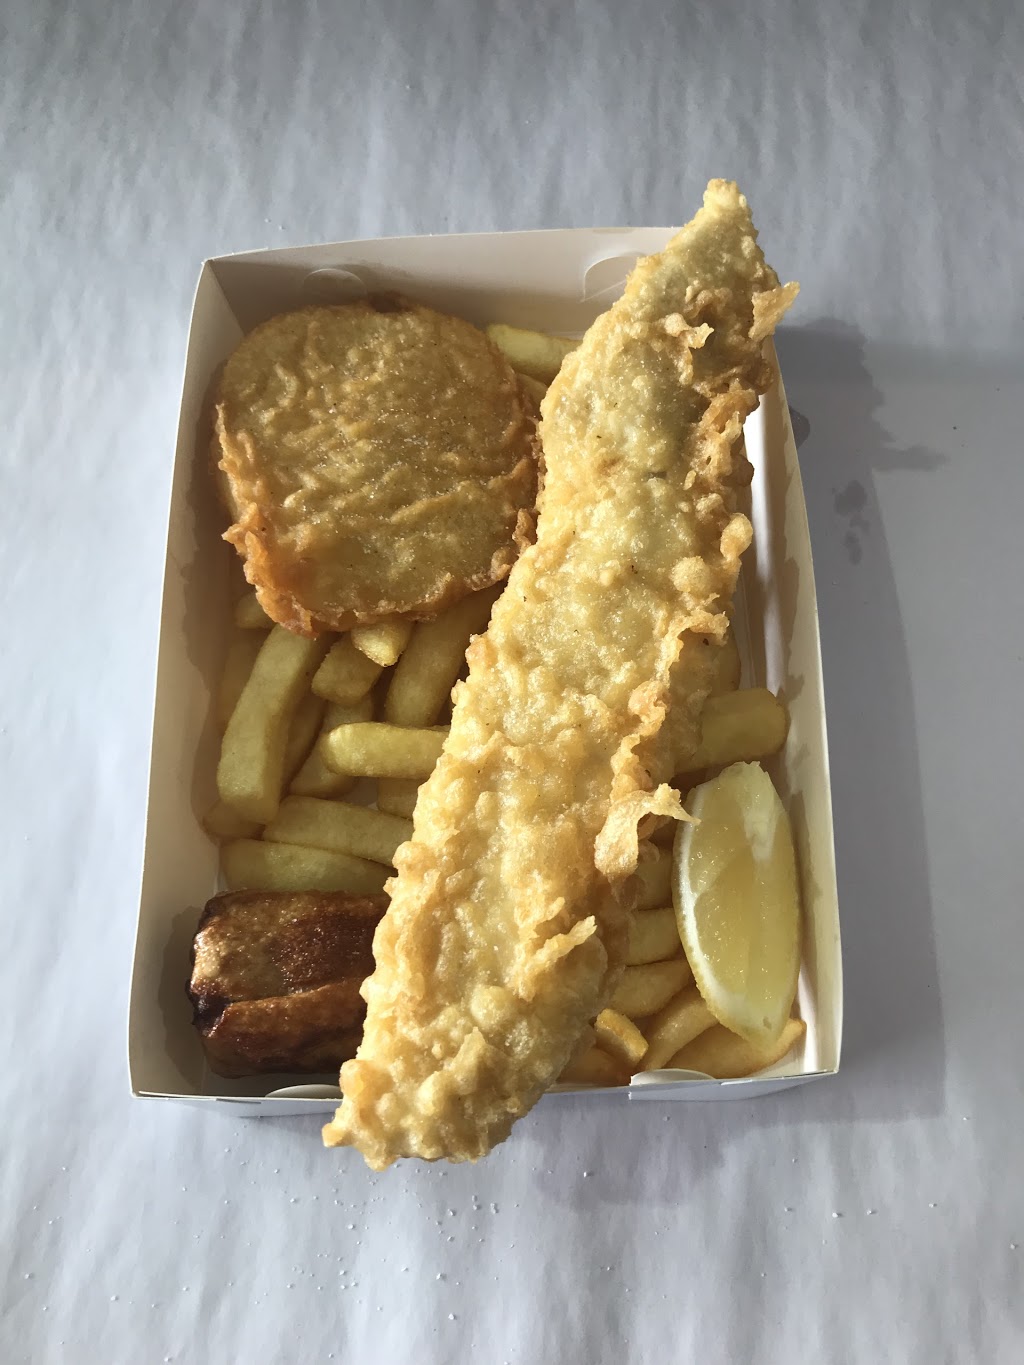 Ocean Star Fish & Chips | 413 Springvale Rd, Forest Hill VIC 3131, Australia | Phone: (03) 9894 3026